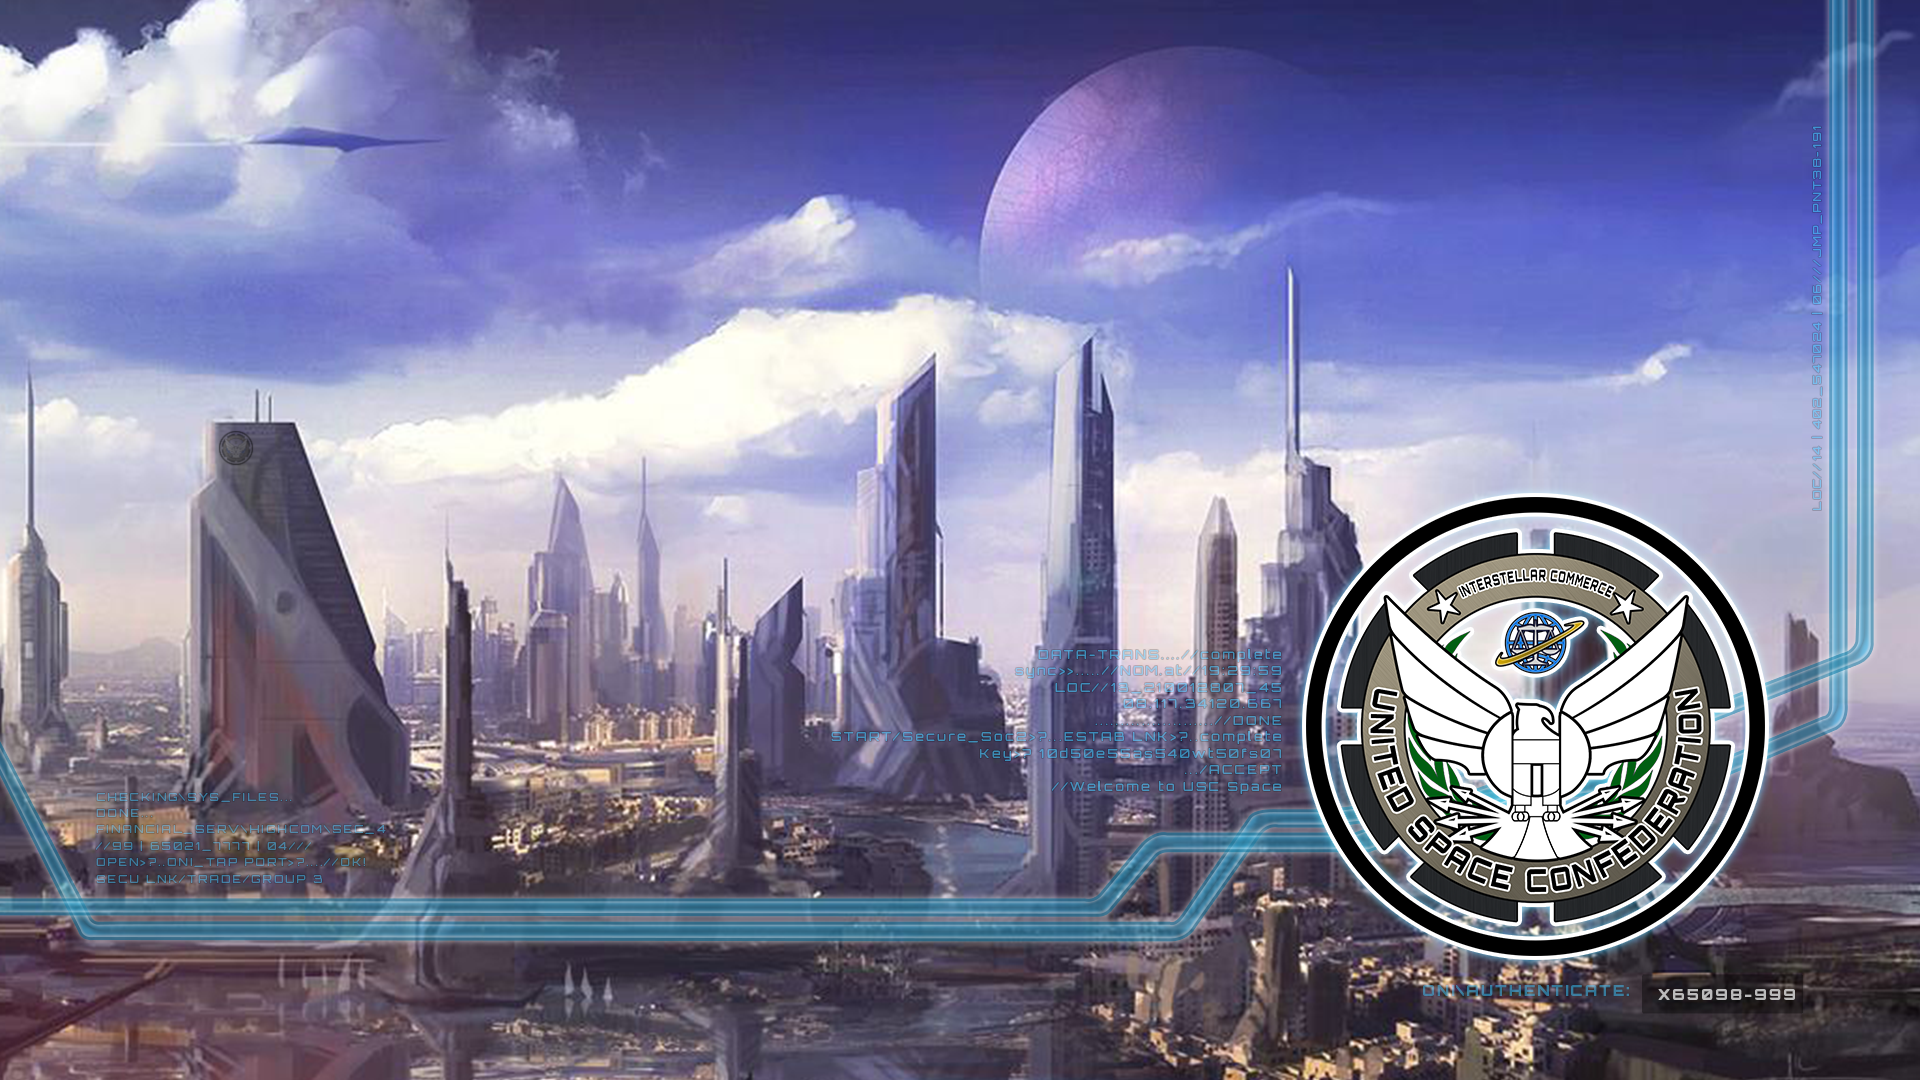 General 1920x1080 Star Citizen United Space Confederation video games PC gaming science fiction video game art